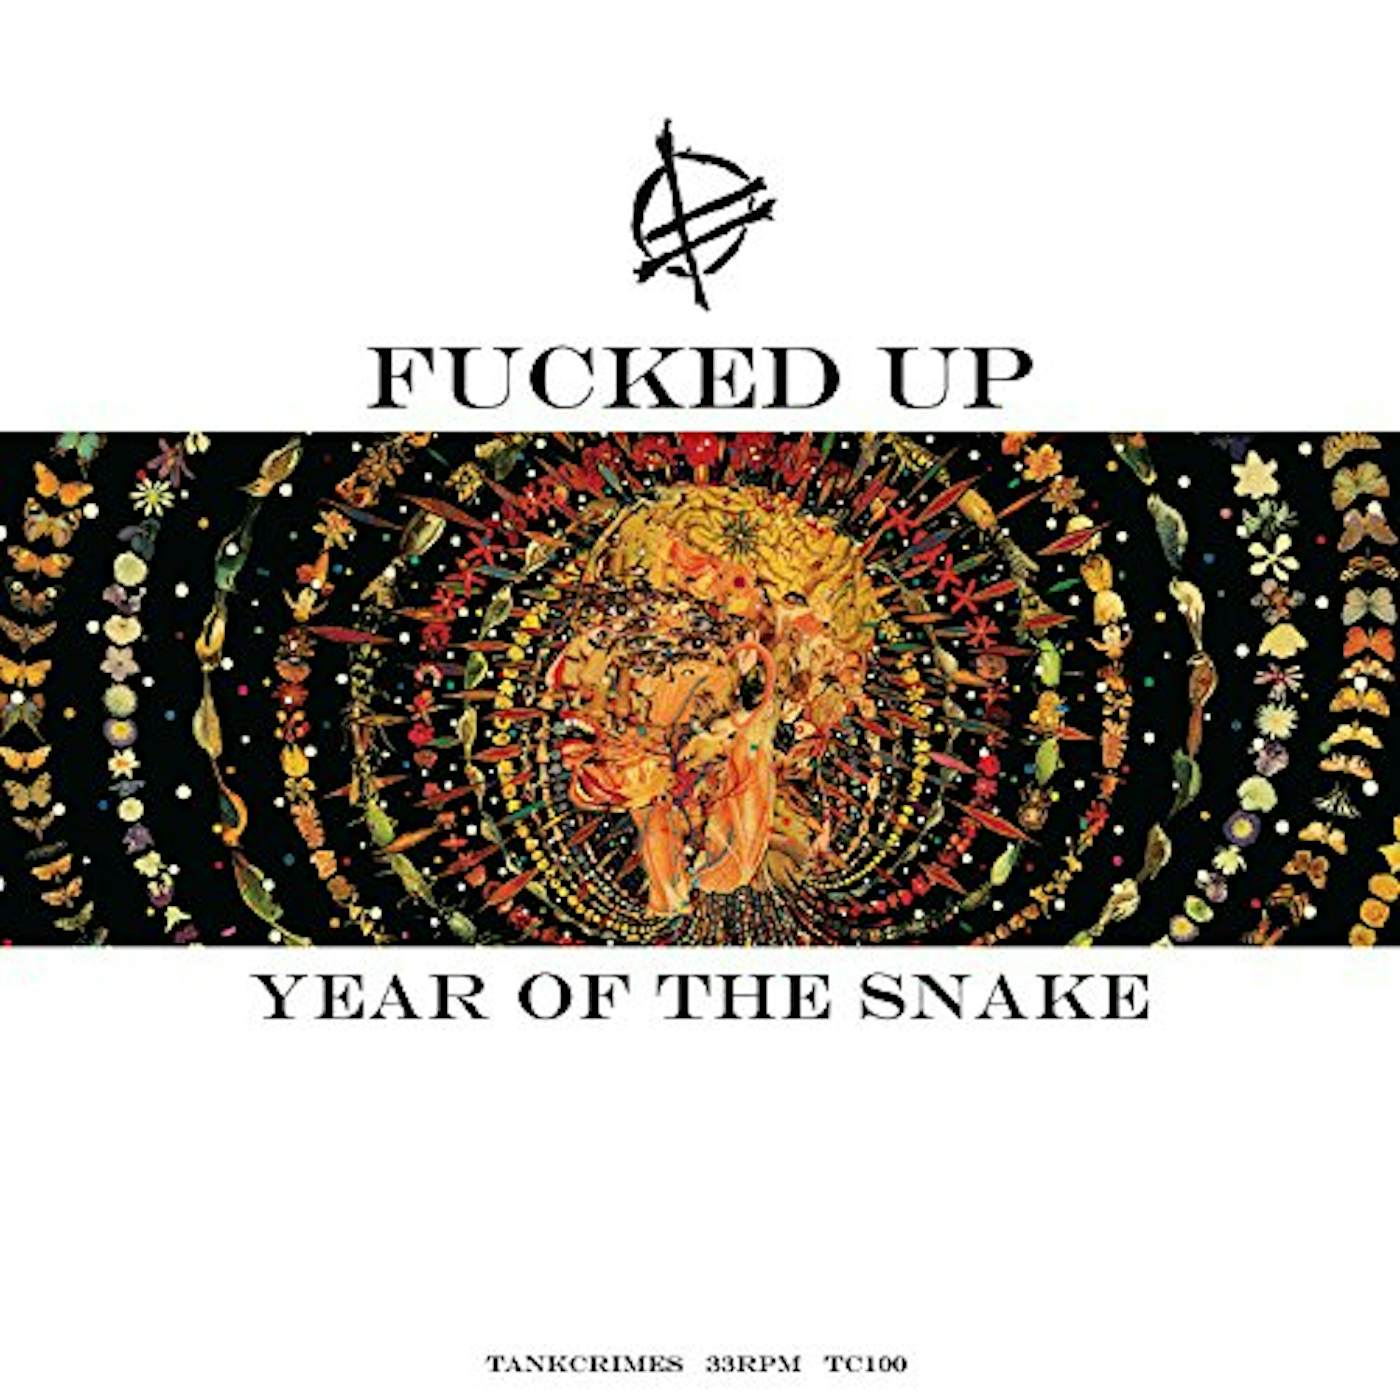 Fucked Up YEAR OF THE SNAKE CD